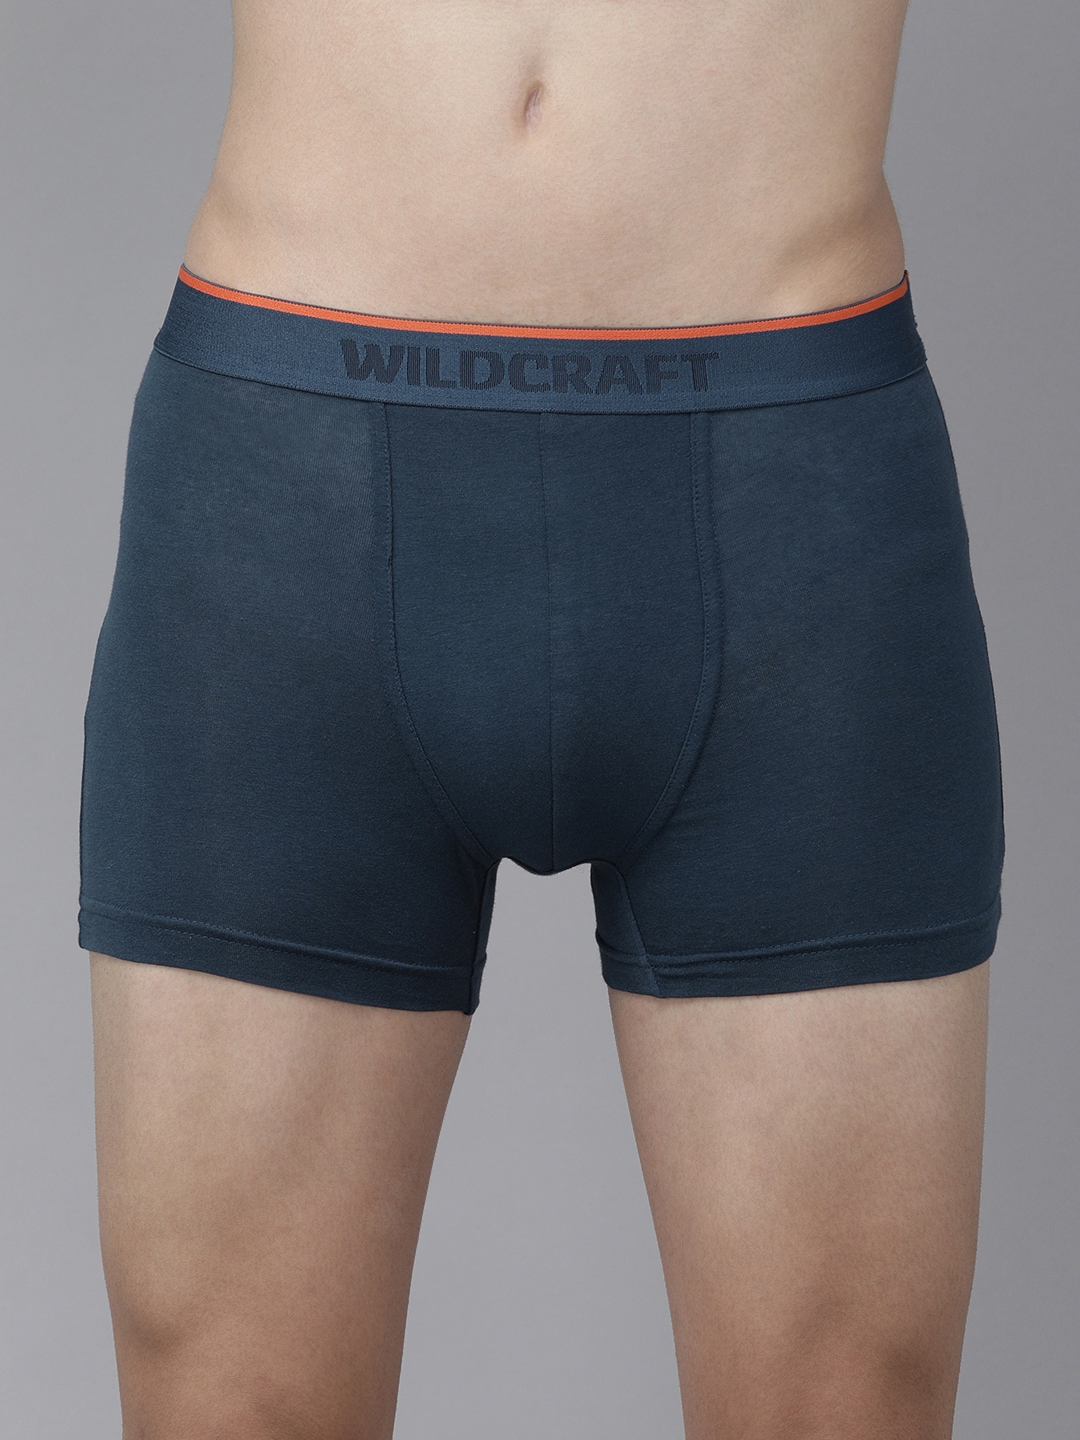 Buy Wildcraft Men Navy Blue Solid Antimicrobial Antiodour Trunks ...